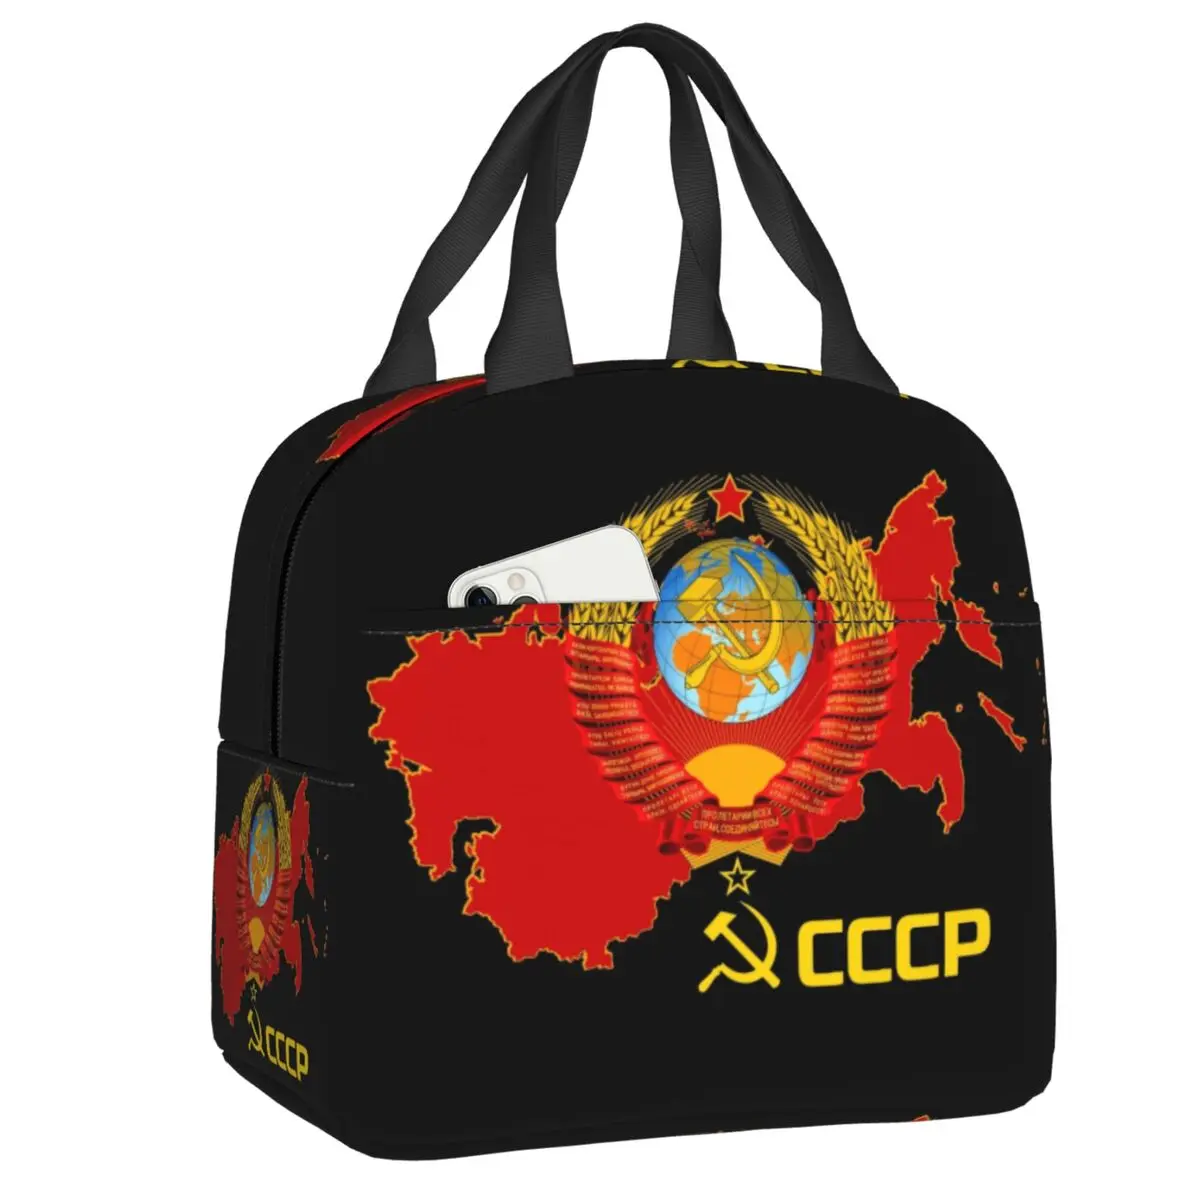 

CCCP Soviet Union Flag Resuable Lunch Box Women Waterproof Russian USSR Communist Thermal Cooler Food Insulated Lunch Bag